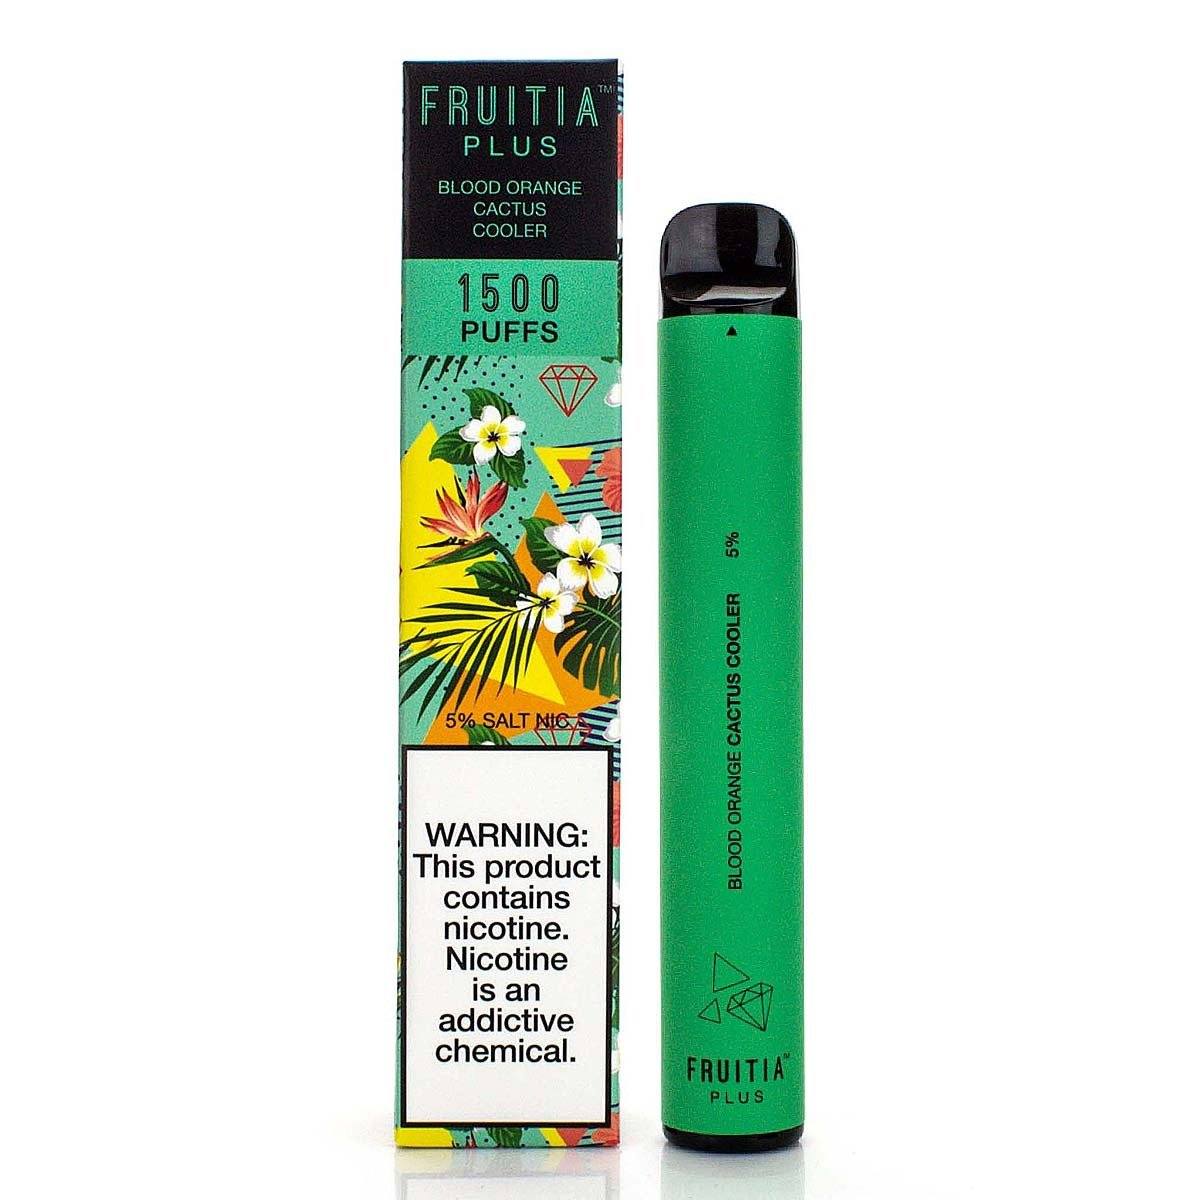 Fruitia Plus Disposable Device | 1500 Puffs Blood Orange Cactus Cooler with Packaging